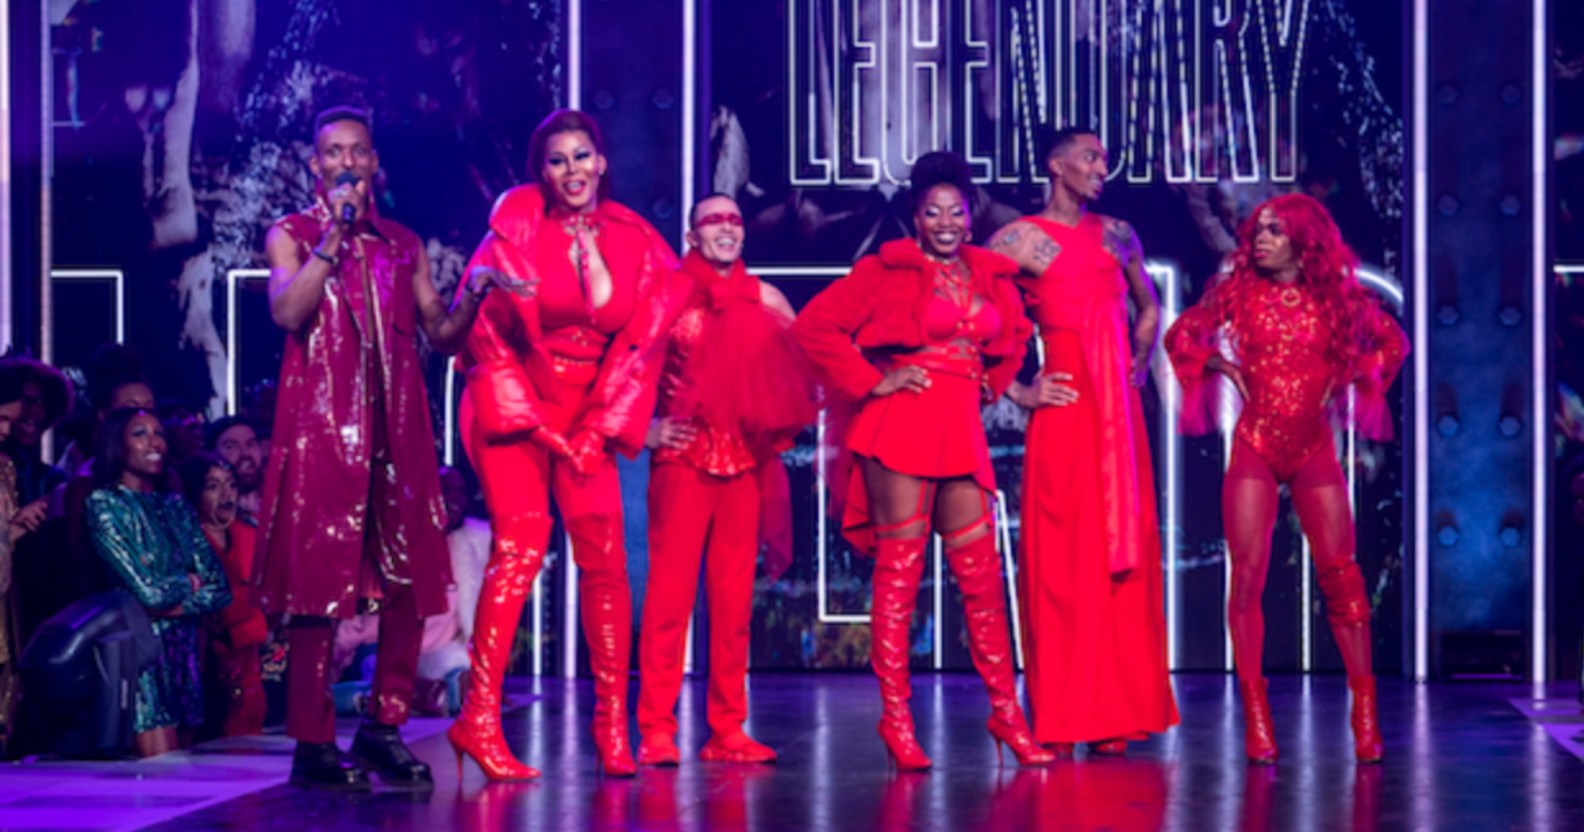 A screengrab from HBO's Legendary showing its contestants dressed in their red outfits on stage and also standing to the side dressed in his purple outfit is actor and dancer Dashaun Wesley who is the MC in the show.(HBO Max)